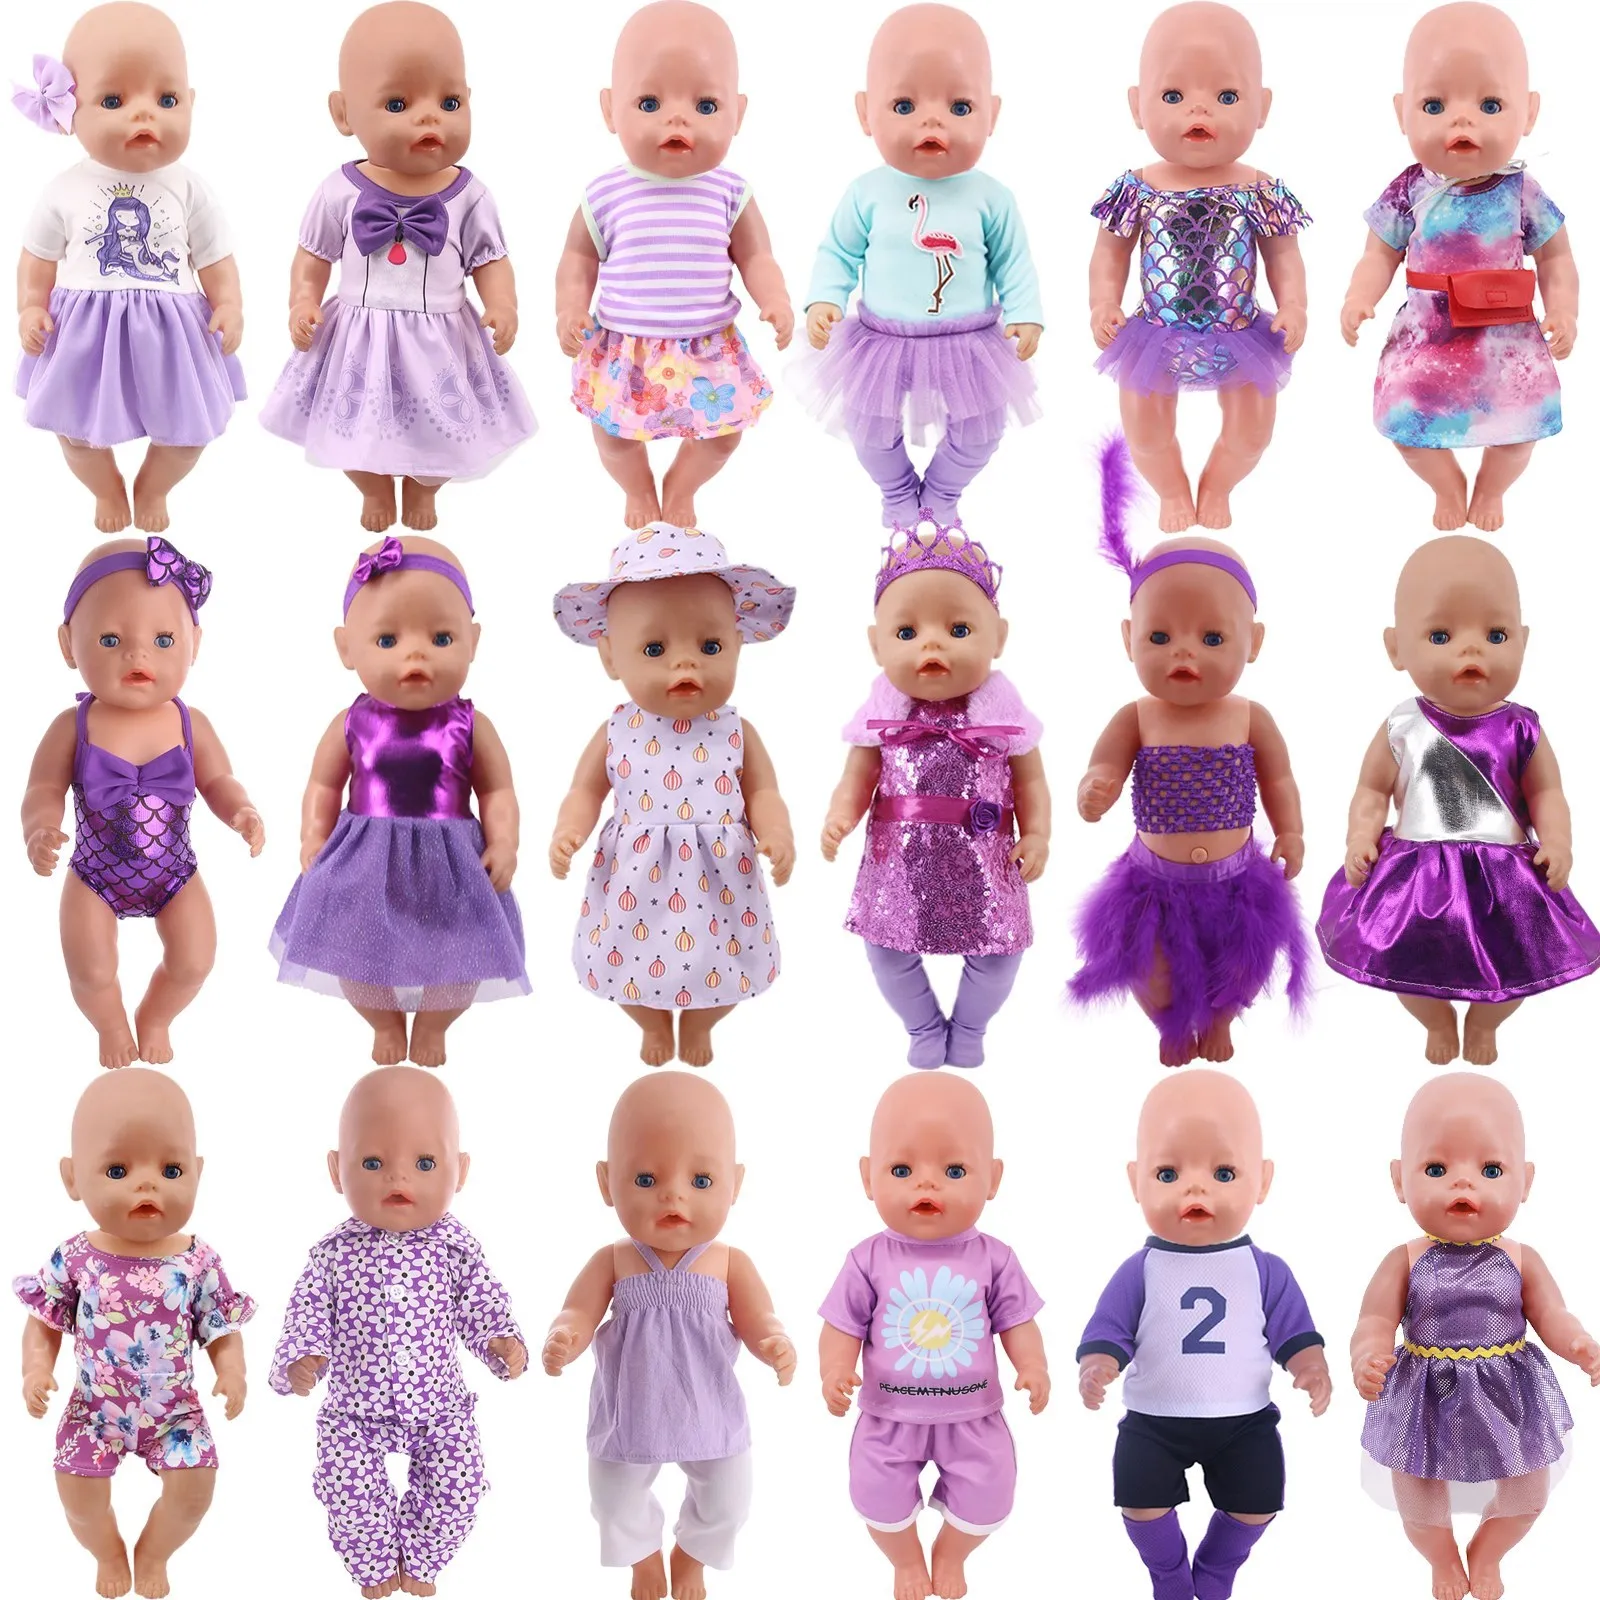 Cute Purple Mini Dress Pajama For Baby 43Cm &18Inch American Doll Clothes,Our Generation,Baby New Born Accessories,Gift For Girl